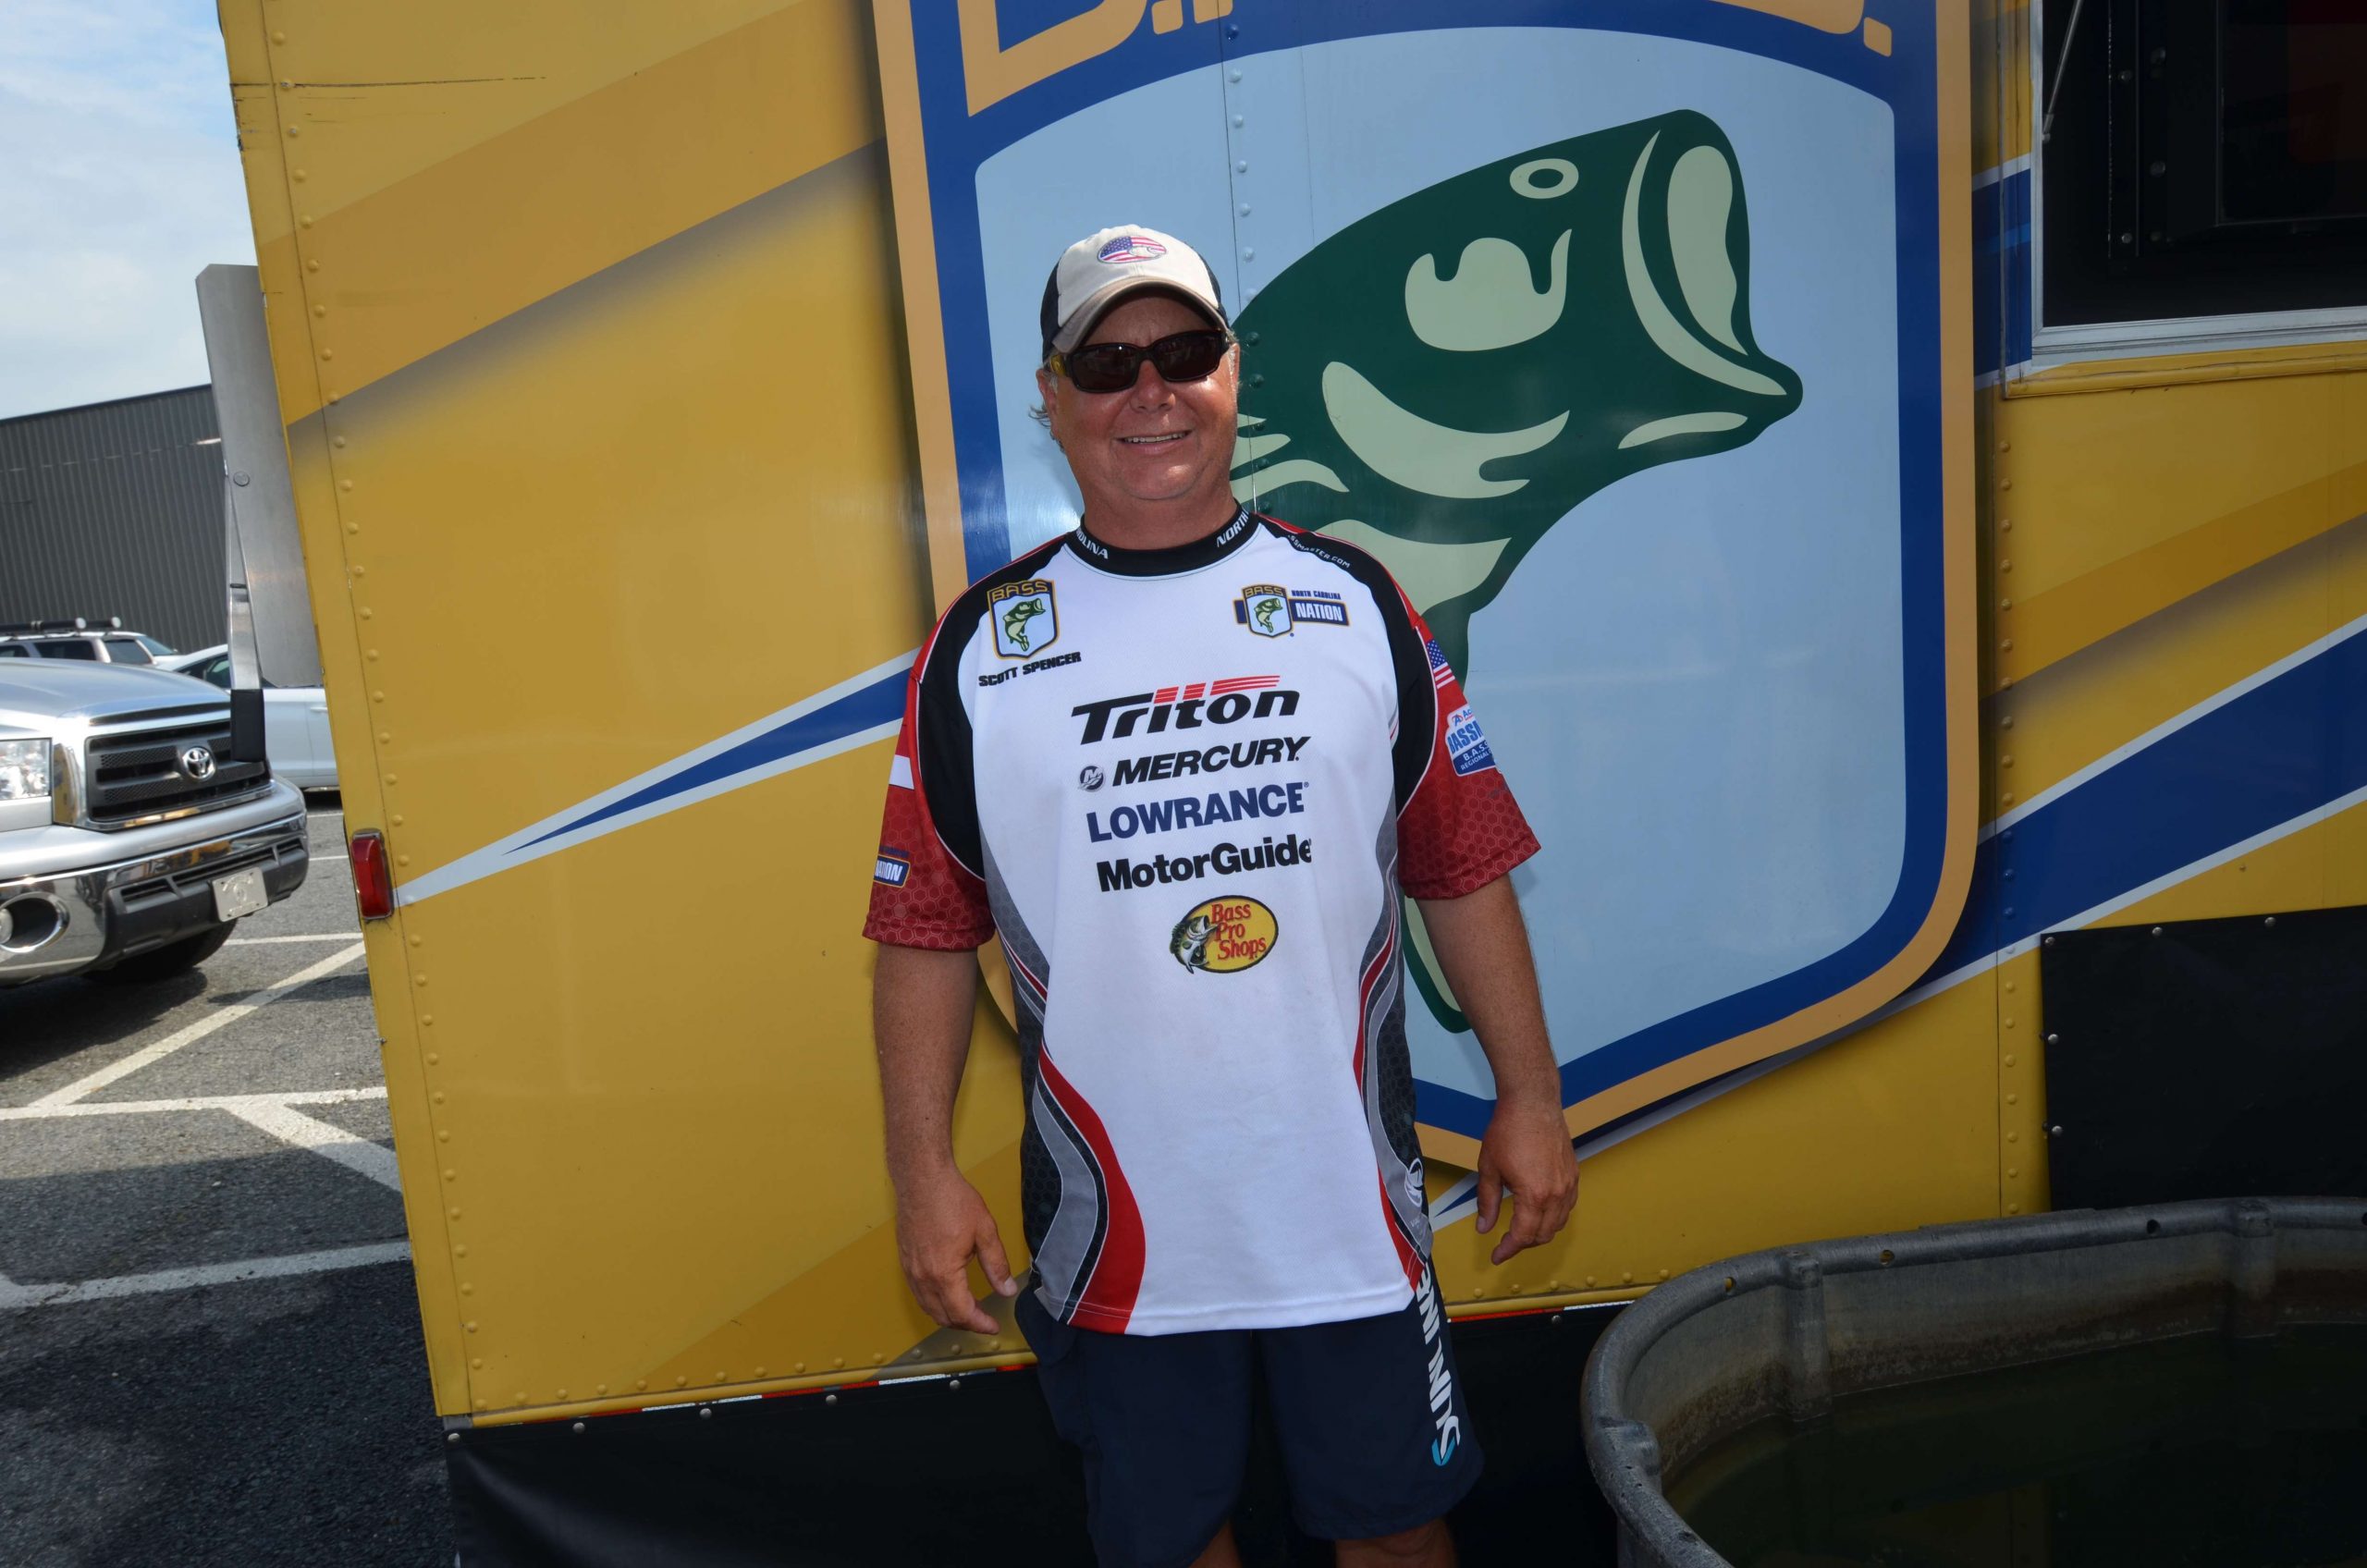 <h4>
Scott Spencer</h4>
North Carolina Nonboater<br>
B.A.S.S. Nation Club: Sandy Creek Bassmasters<BR>	
Occupation: Traffic Technician <BR>
Hobbies: Cooking, music, fundraising for Cystic Fibrosis Foundation<BR>
Sponsors: Ardent, Capital Area Boat Works, Nautic Sport, Illusion Baits, Local Lures, Tasun
